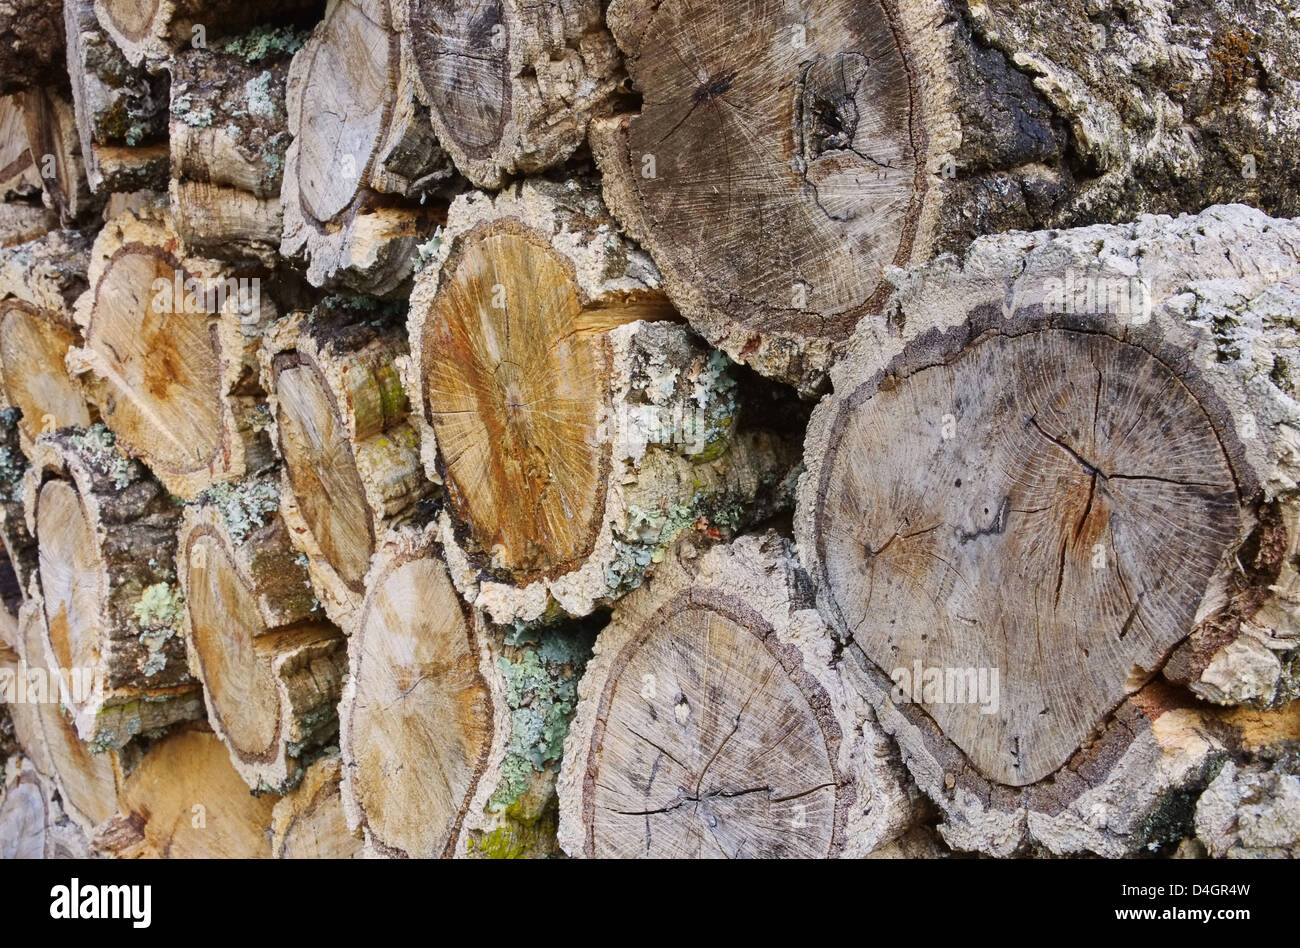 Holzstapel Korkeiche - stack of wood from cork oak 02 Stock Photo